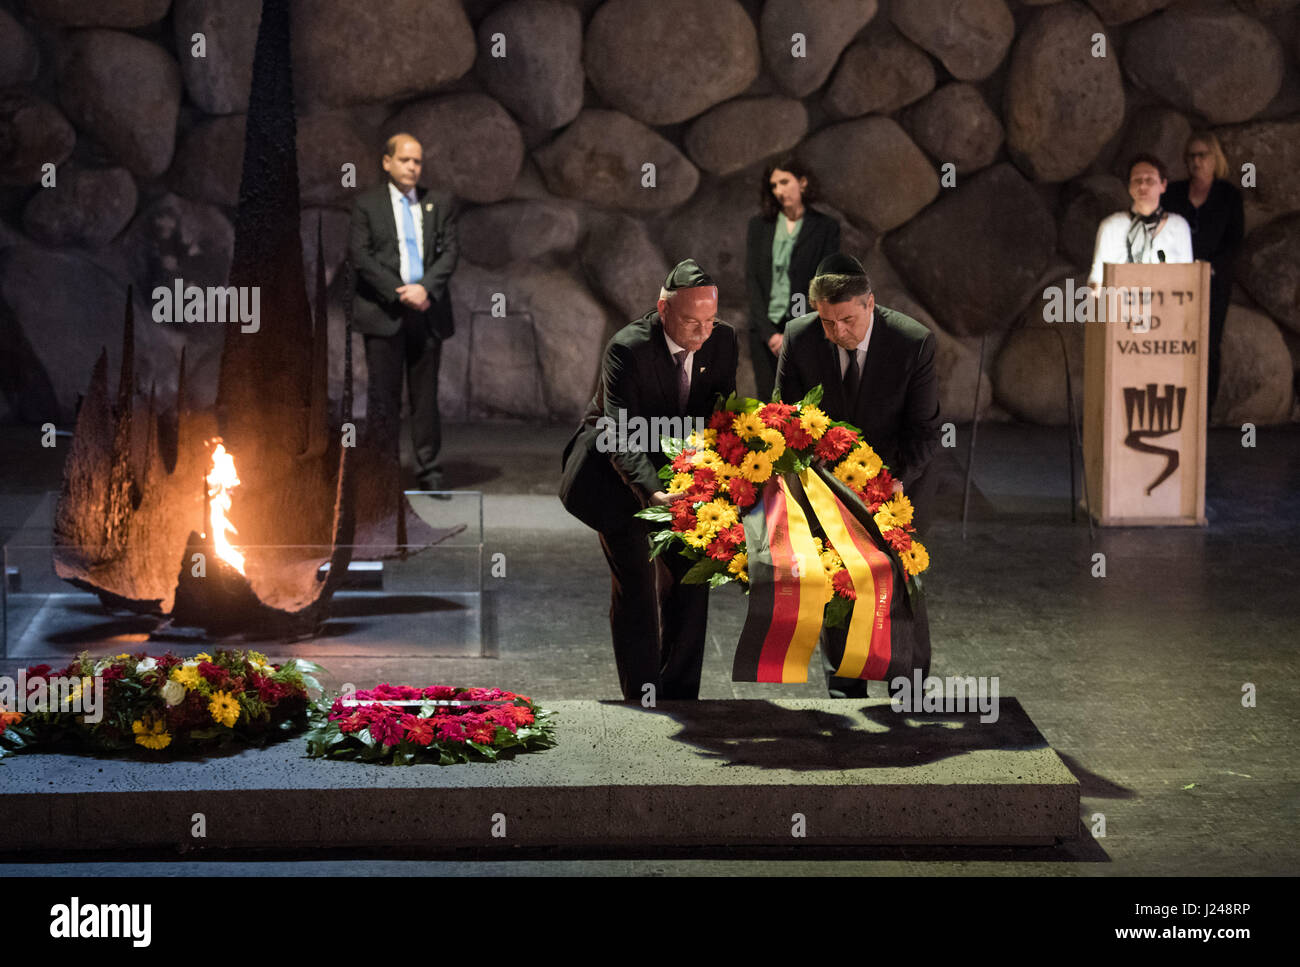 Jerusalem, Israel. 24th Apr, 2017. dpatop - German foreign minister Sigmar Gabriel (SPD, R), Yakov Hadas-Handelsman, Israeli ambasador to Germany, Clemens von Goetze, the German ambassador to Israel, and curator Eliad Moreh Rosenberg in the Yad Vashem Holocaust Memorial in Jerusalem, Israel, 24 April 2017. Gabriel is currently conducting a short visit to the Middle East. He will visit Israel, Jordan and the autonomous Palestinian territories today and tomorrow. Photo: Bernd von Jutrczenka/dpa/Alamy Live News Stock Photo